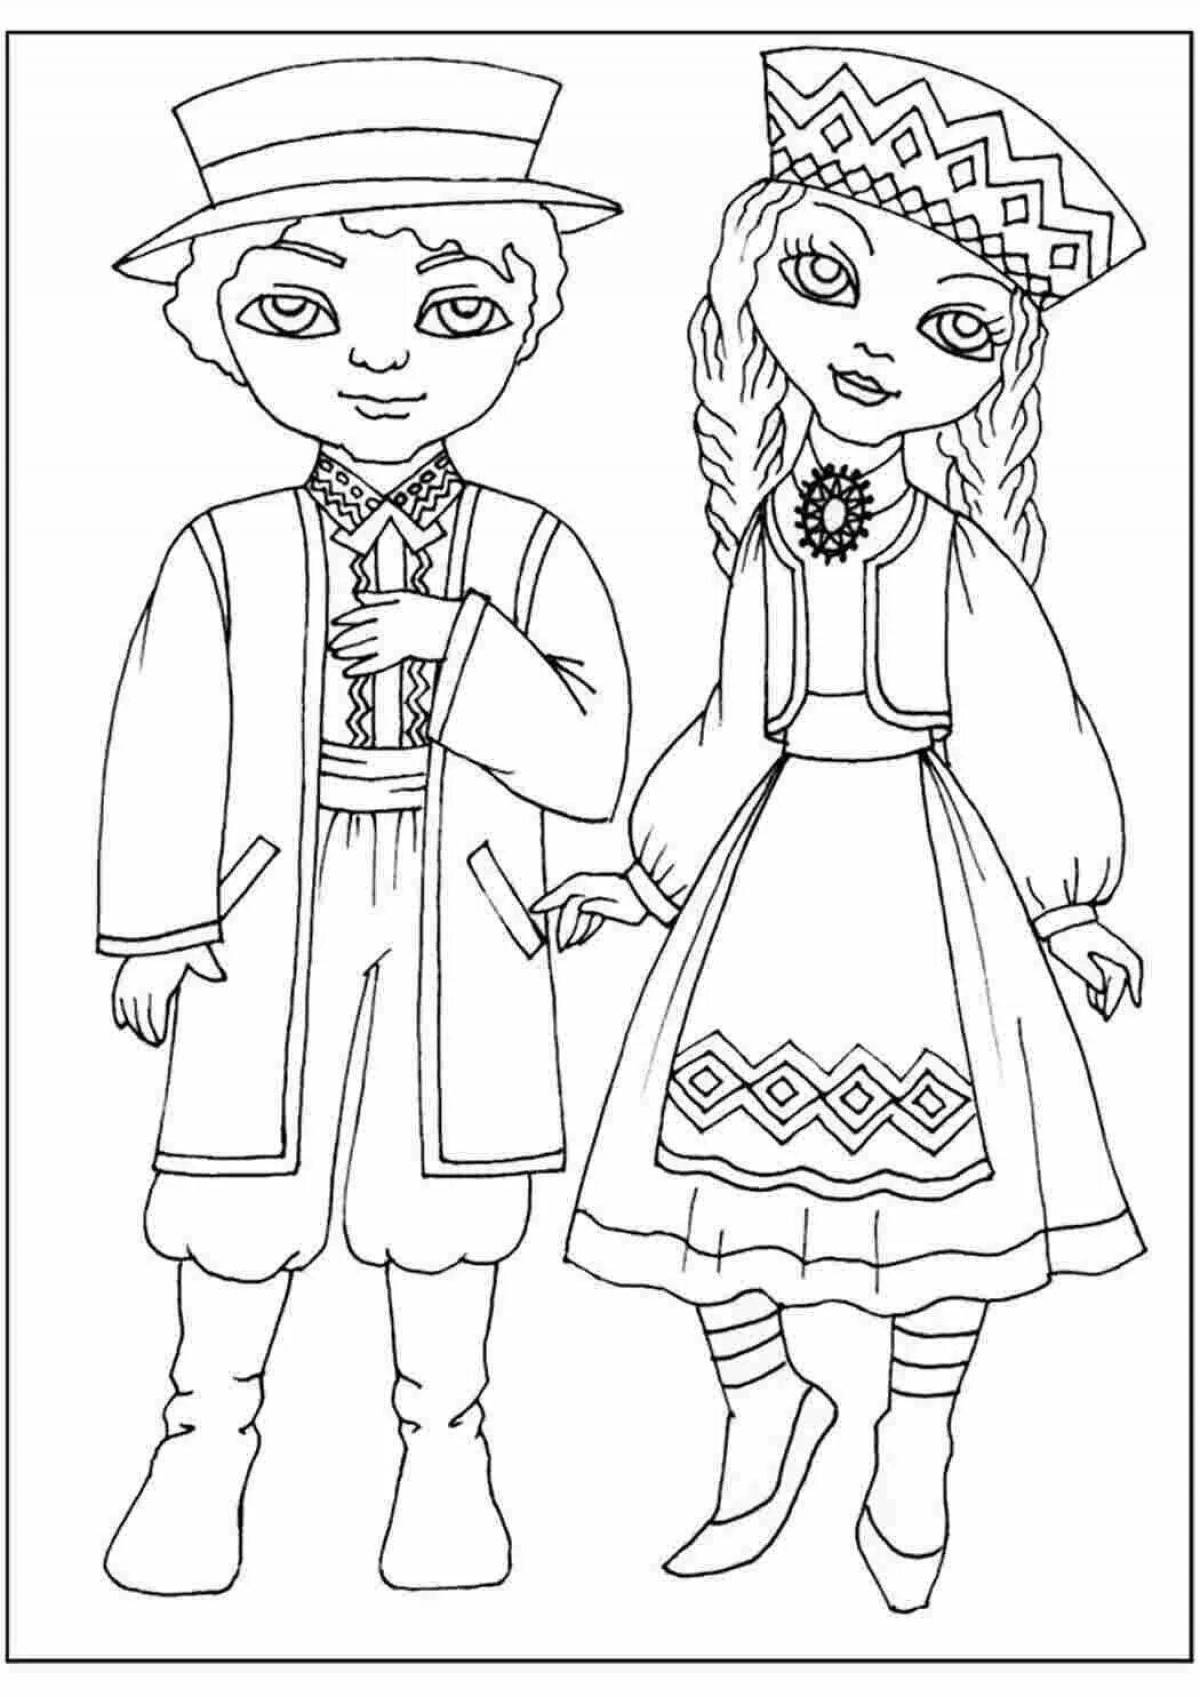 Coloring page of a cheerful folk costume for children